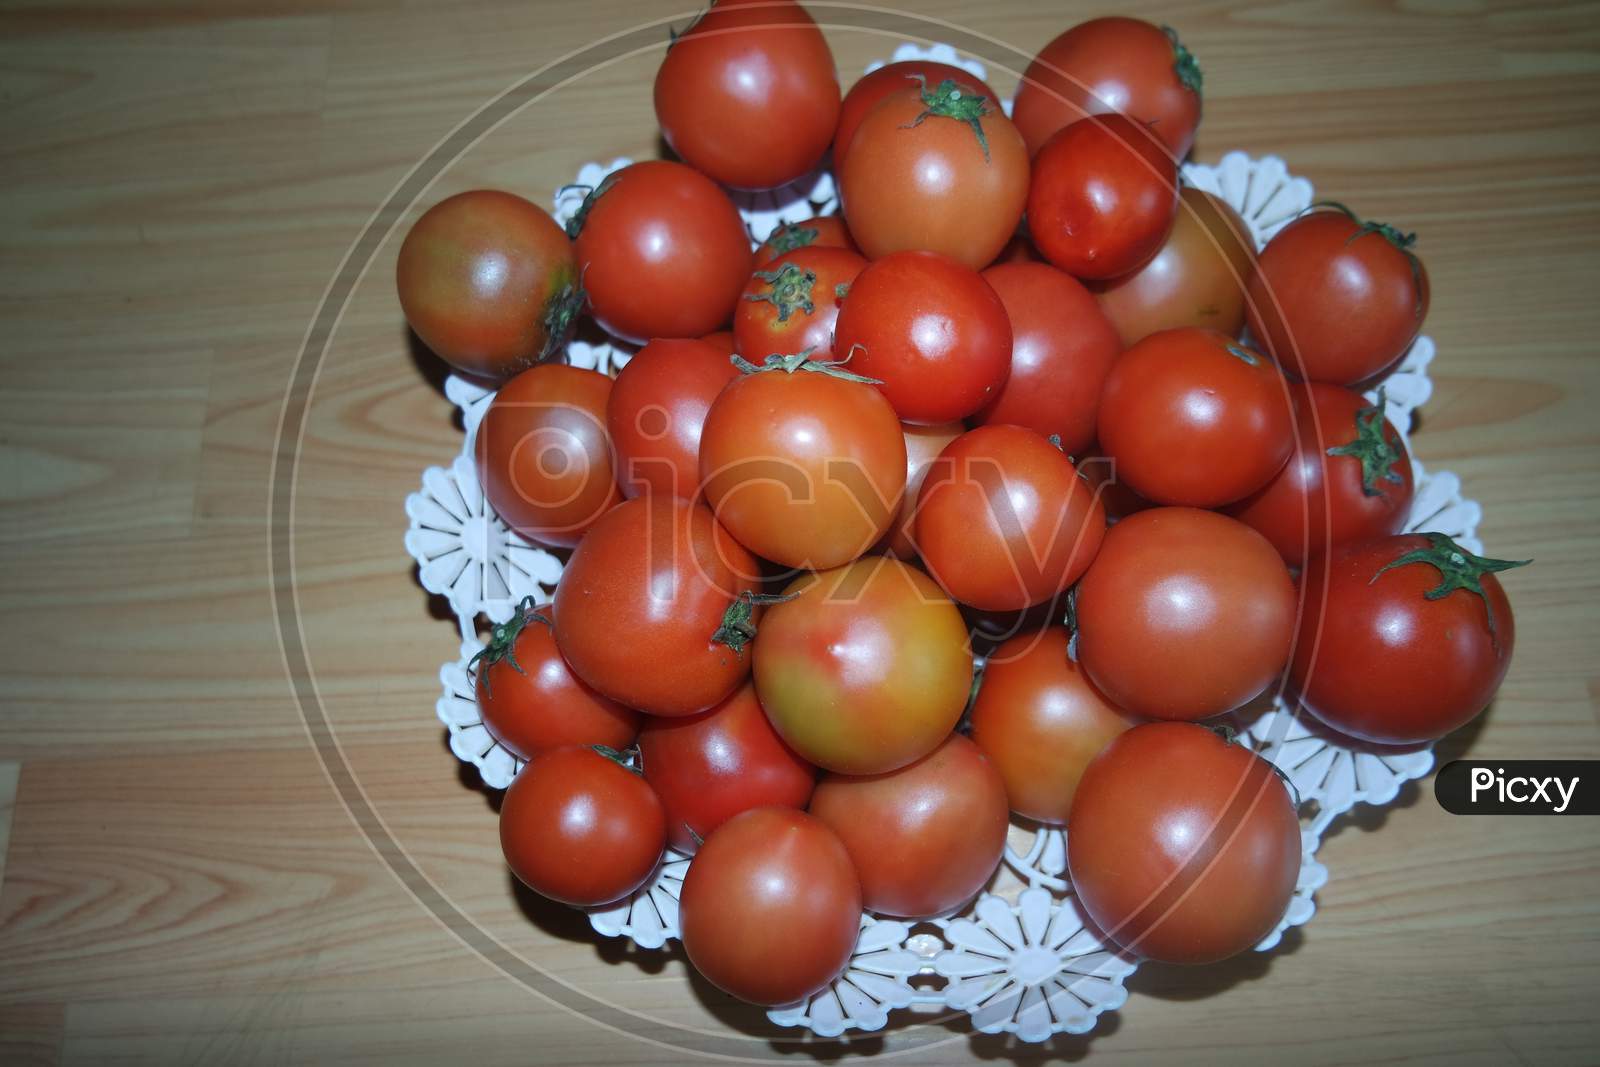 Close-Up View Of Red Tomatoes In White Basket On A Wooden Floor In Market